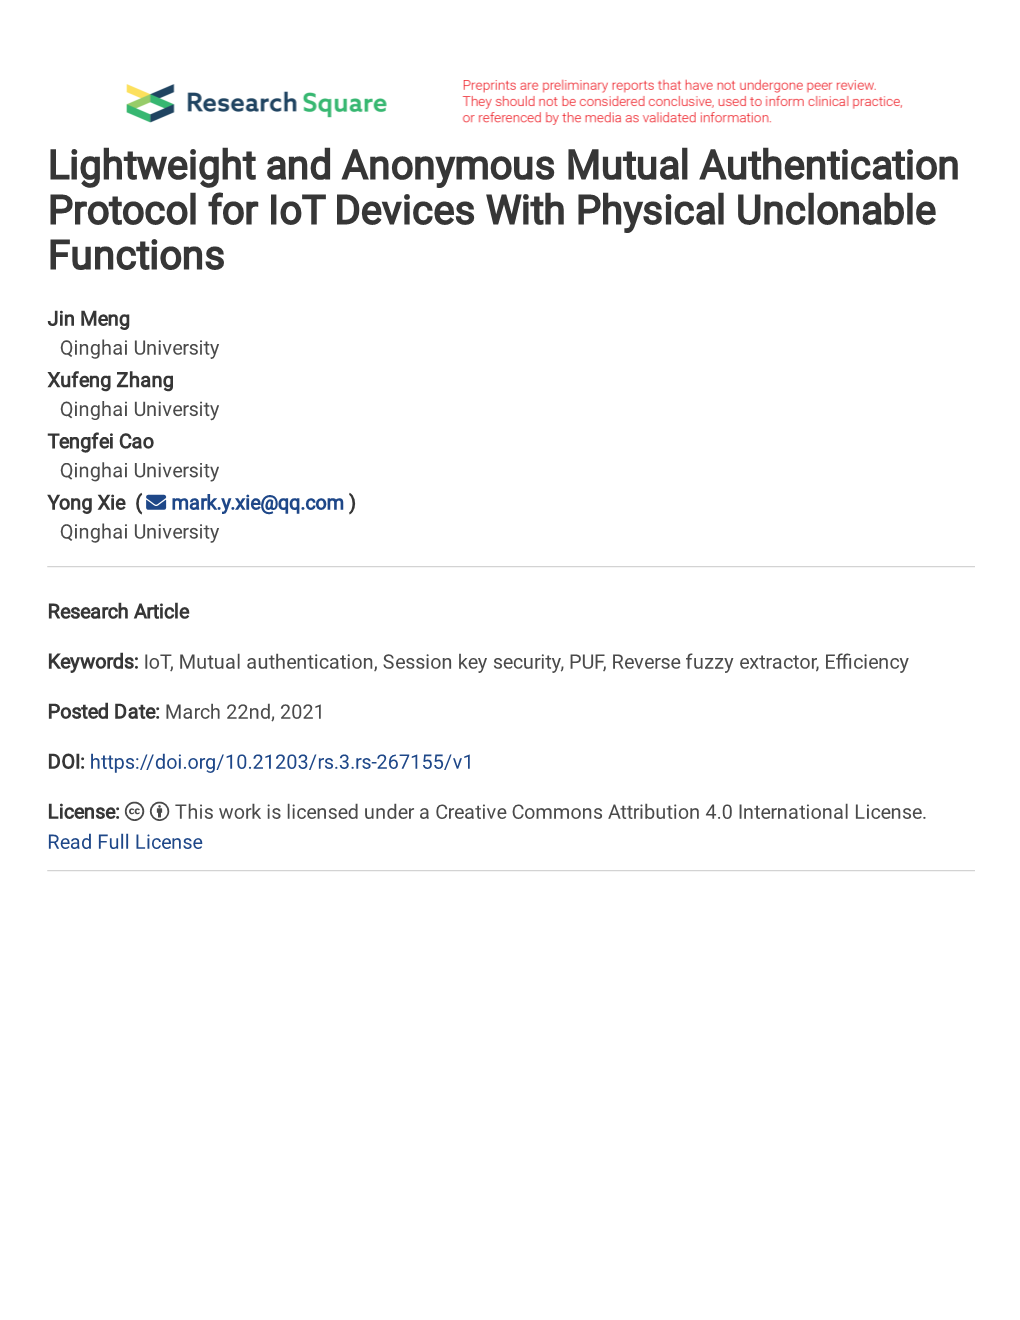 Lightweight and Anonymous Mutual Authentication Protocol for Iot Devices with Physical Unclonable Functions